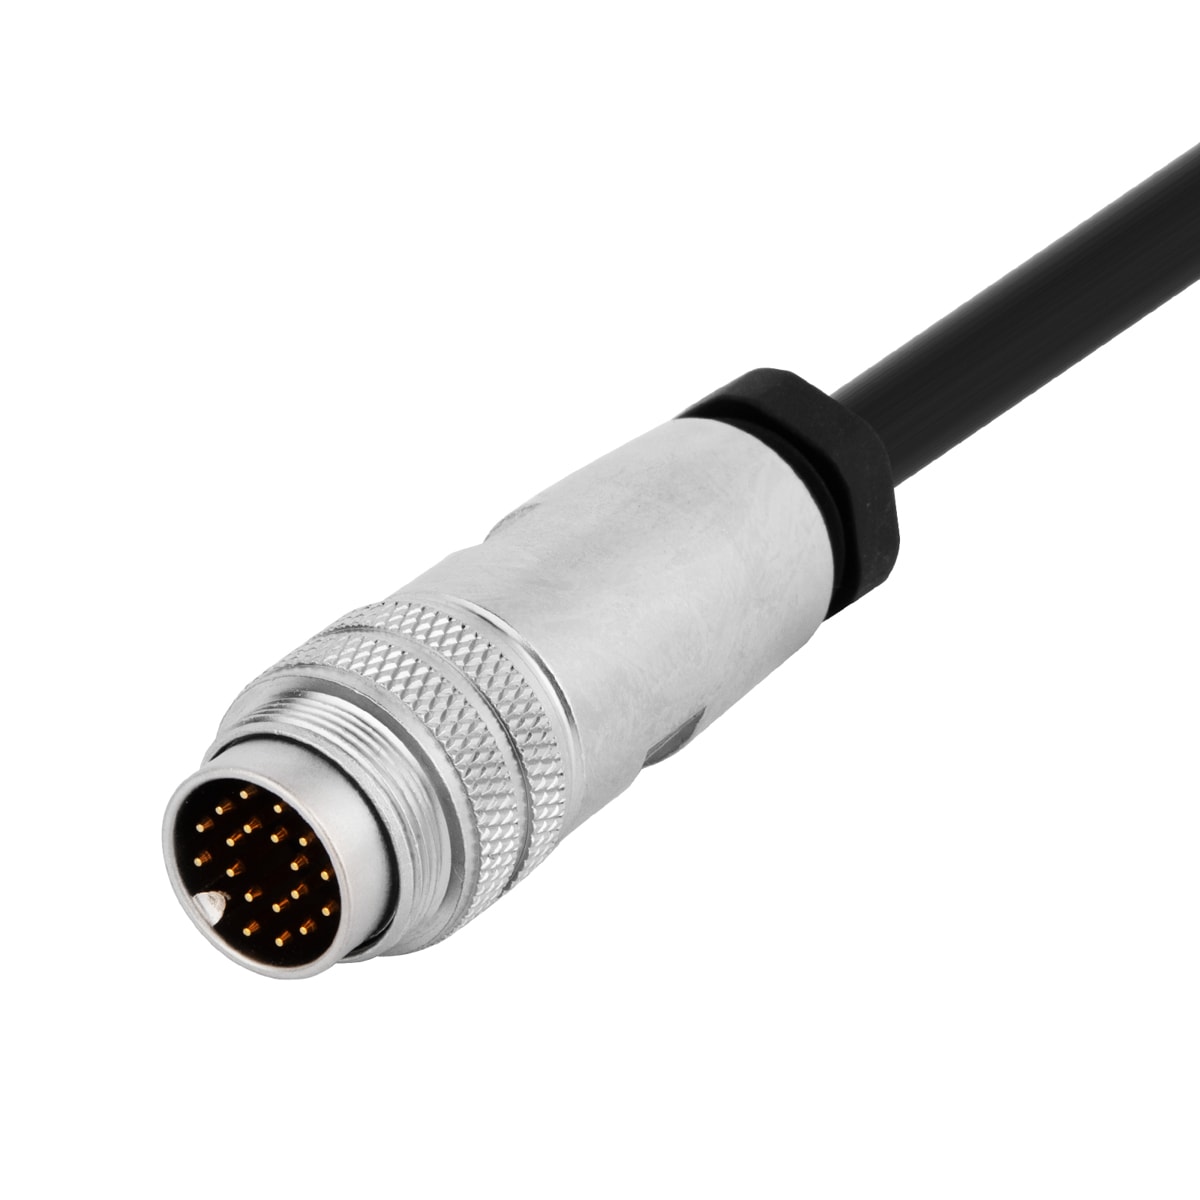 M16 cable connector, male, contacts:19,field assembly type, solder connection, straight, IP67, UL certified